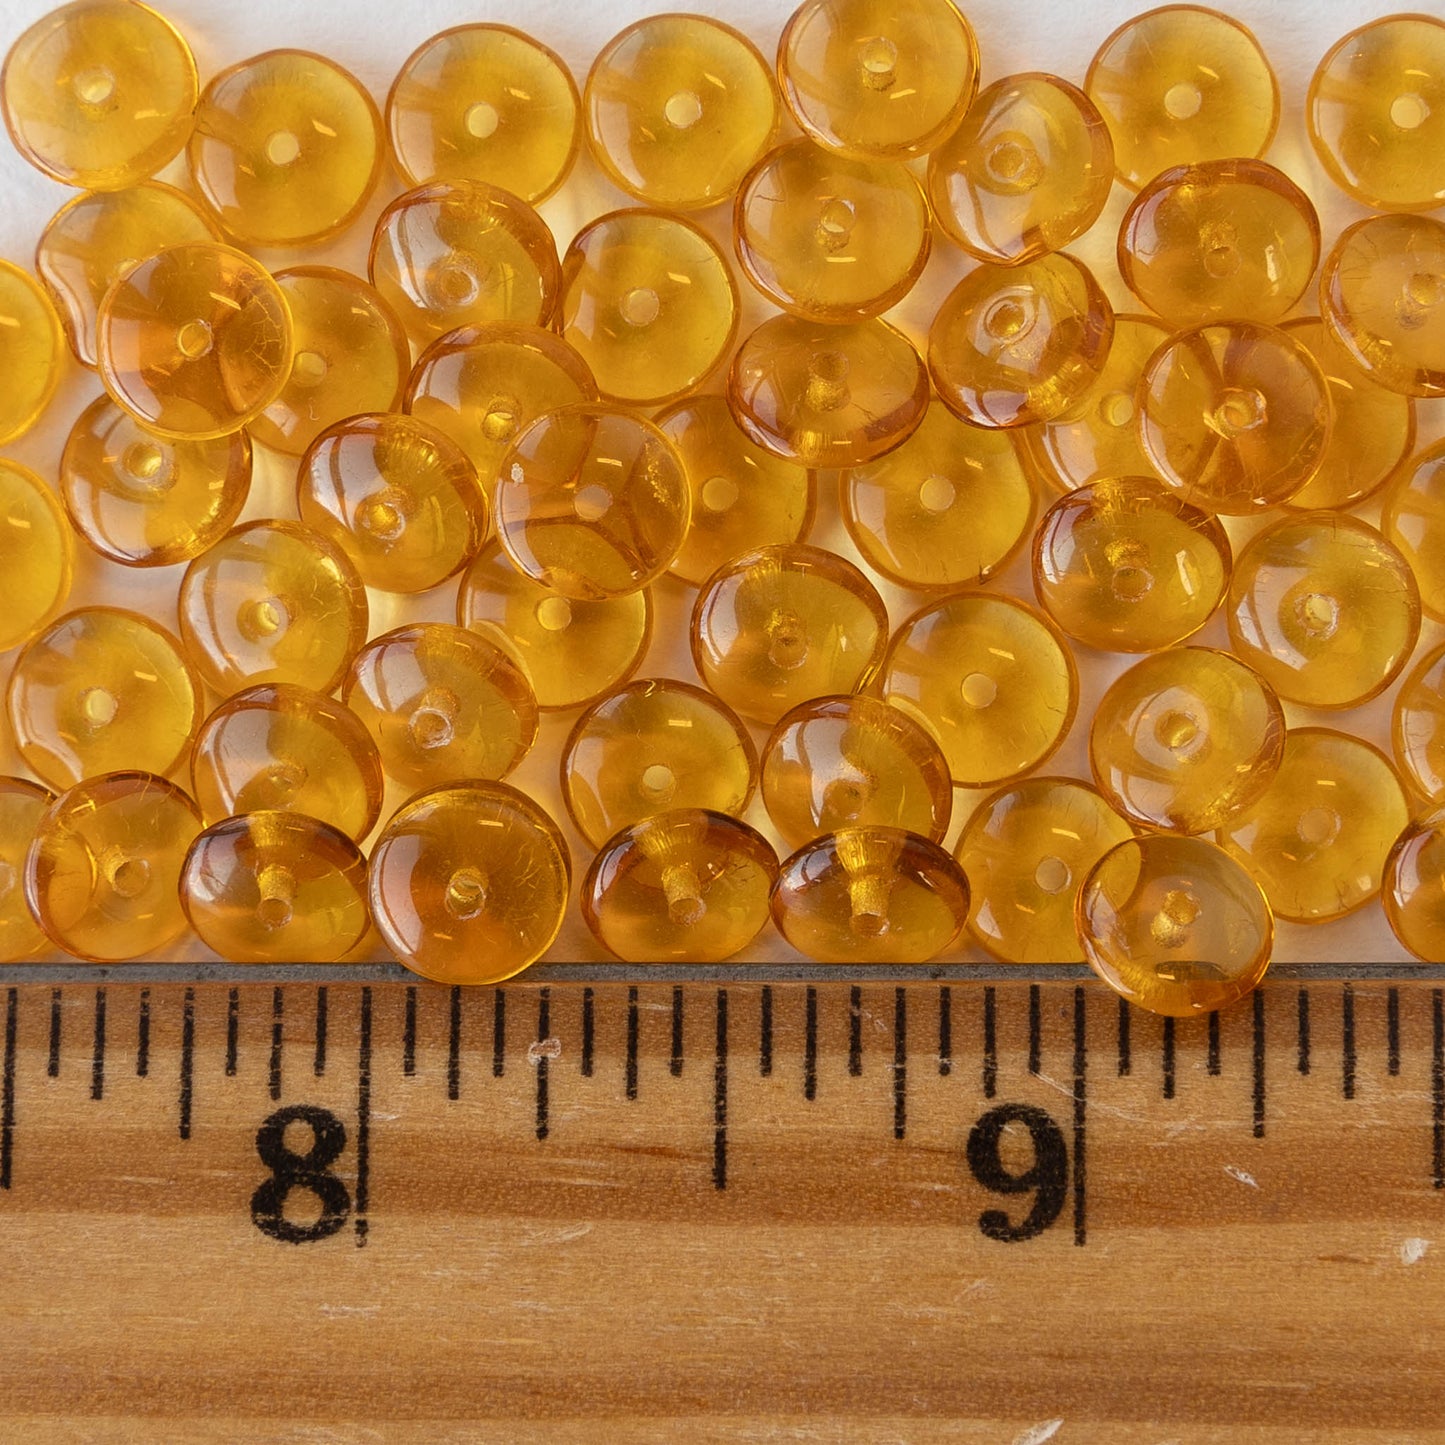 7mm Rondelle Beads - Md. Amber - 100 Beads